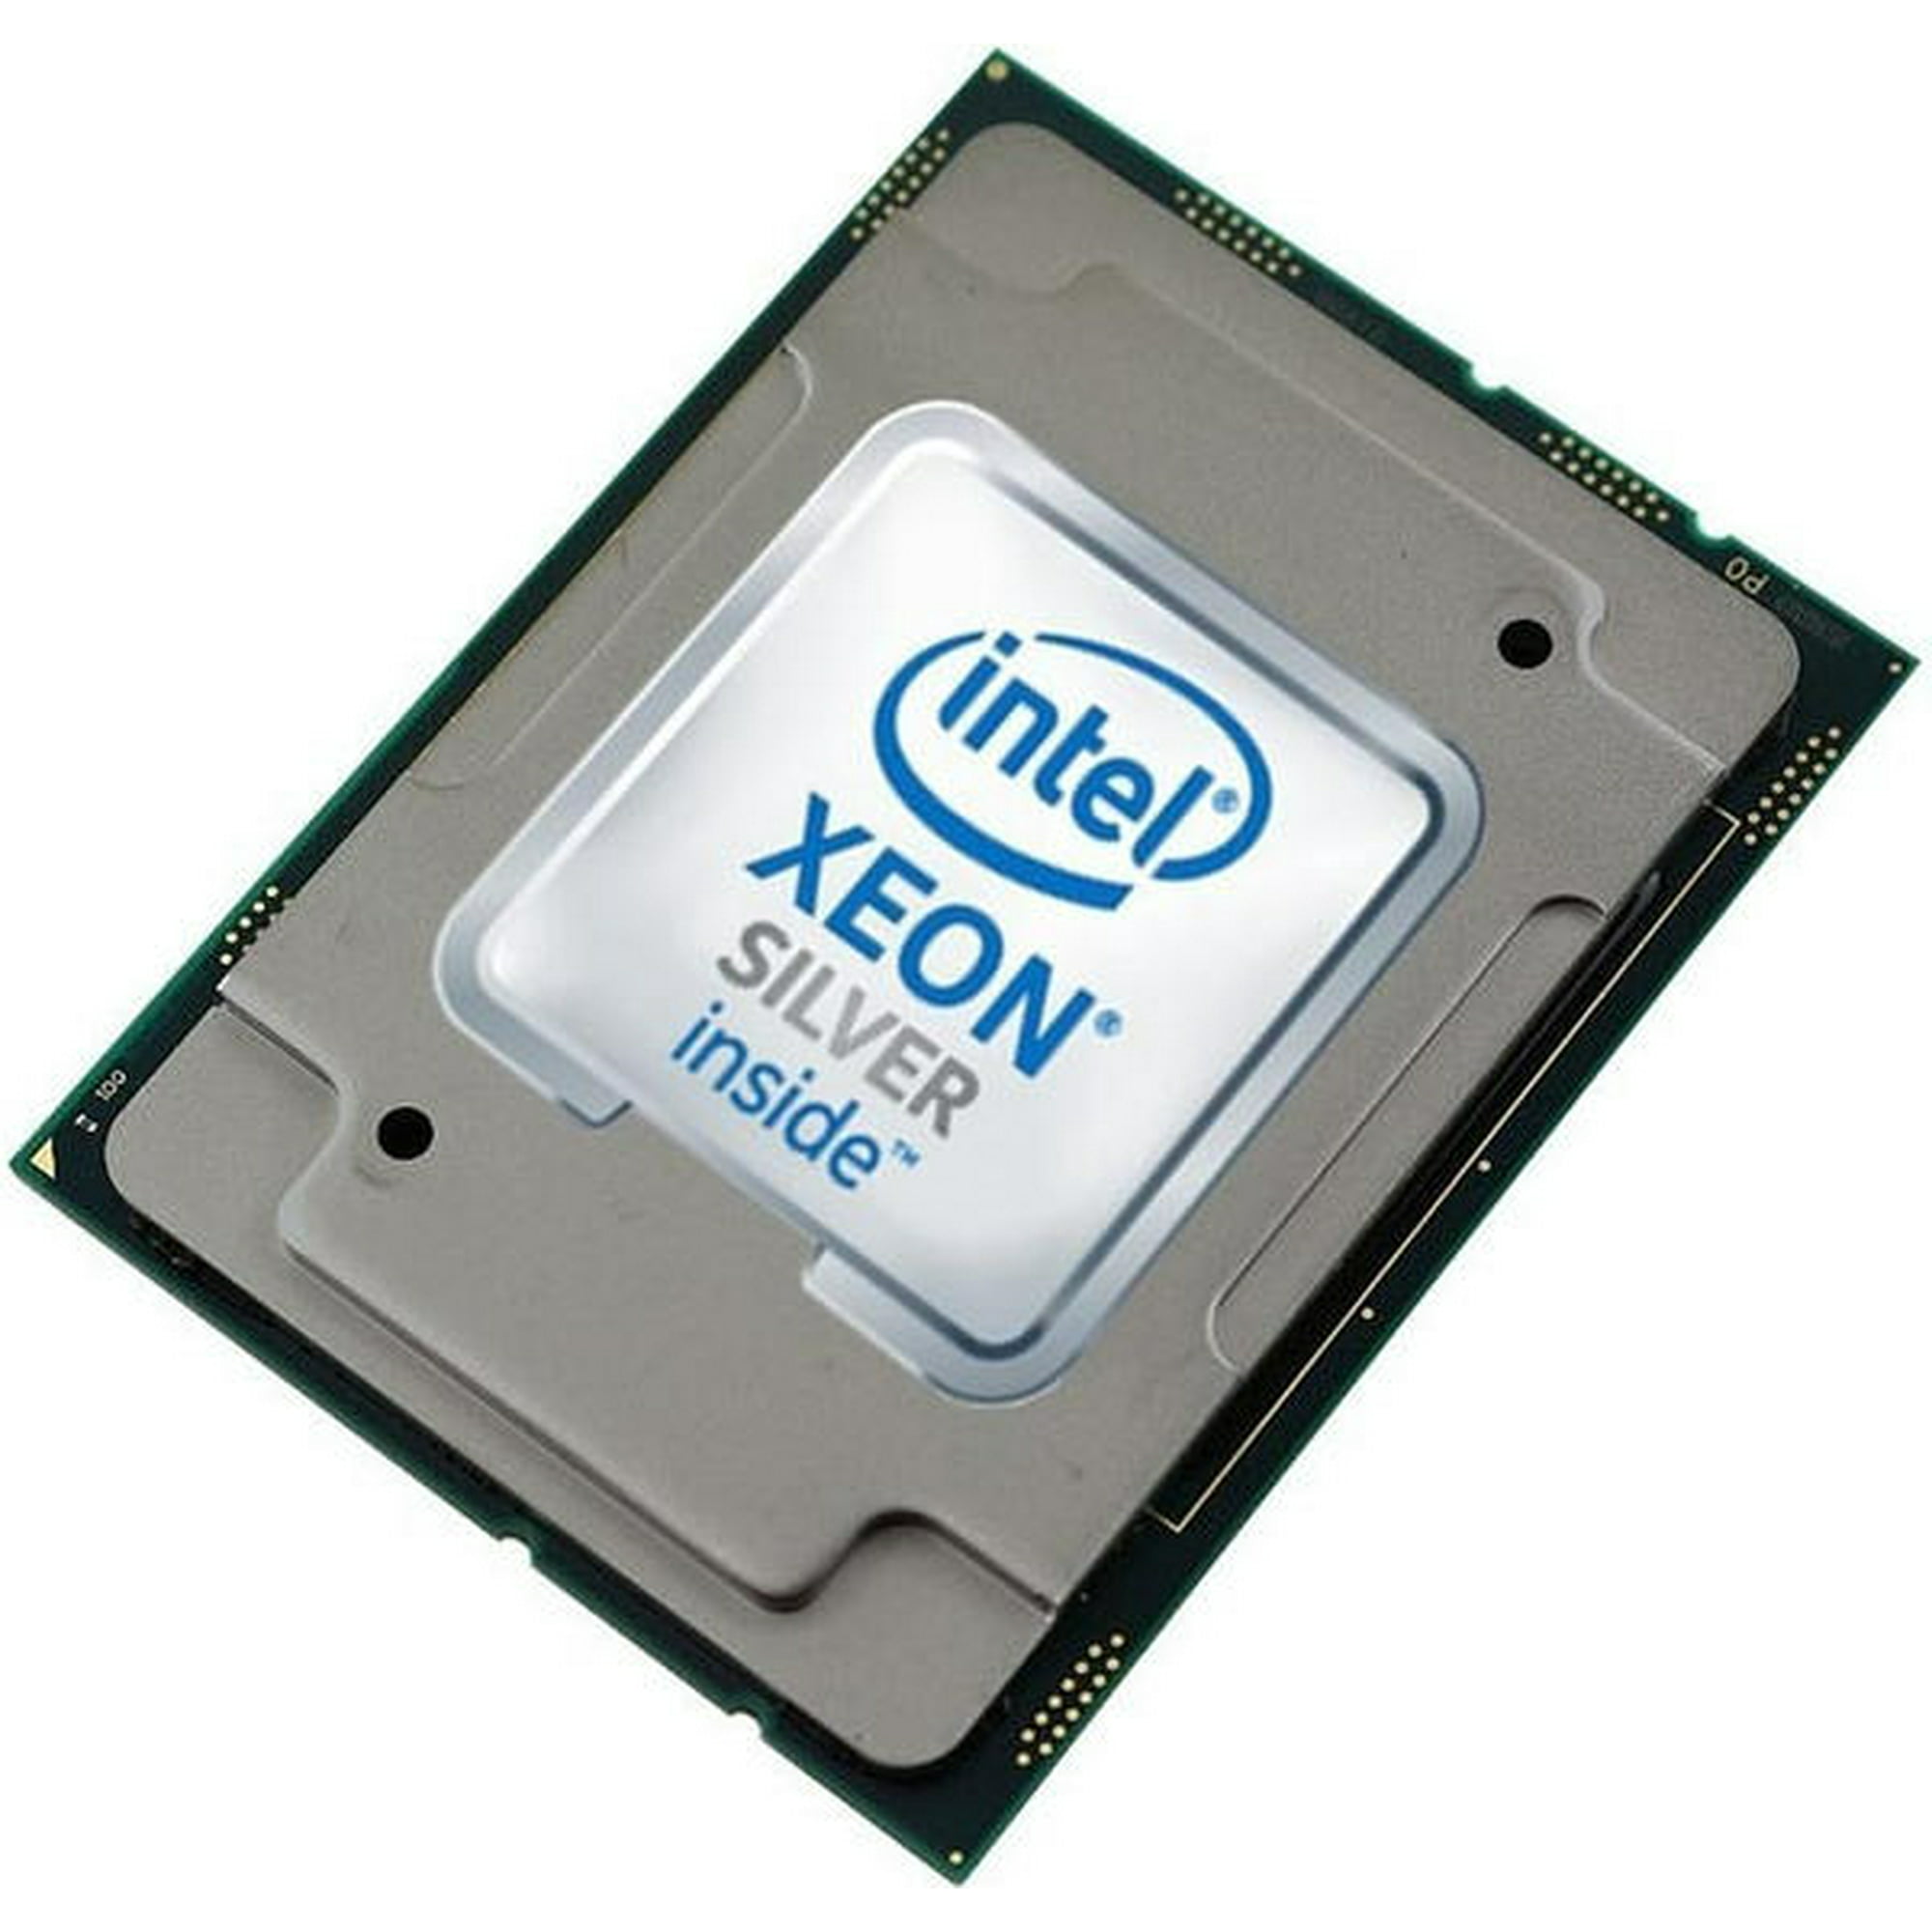 Conventie Slagschip periscoop Intel Xeon Silver 4215R - 3.2 GHz - 8-core - 16 threads - 11 MB cache - for  ThinkAgile VX Certified Node 7Y94, ThinkSyst | Walmart Canada